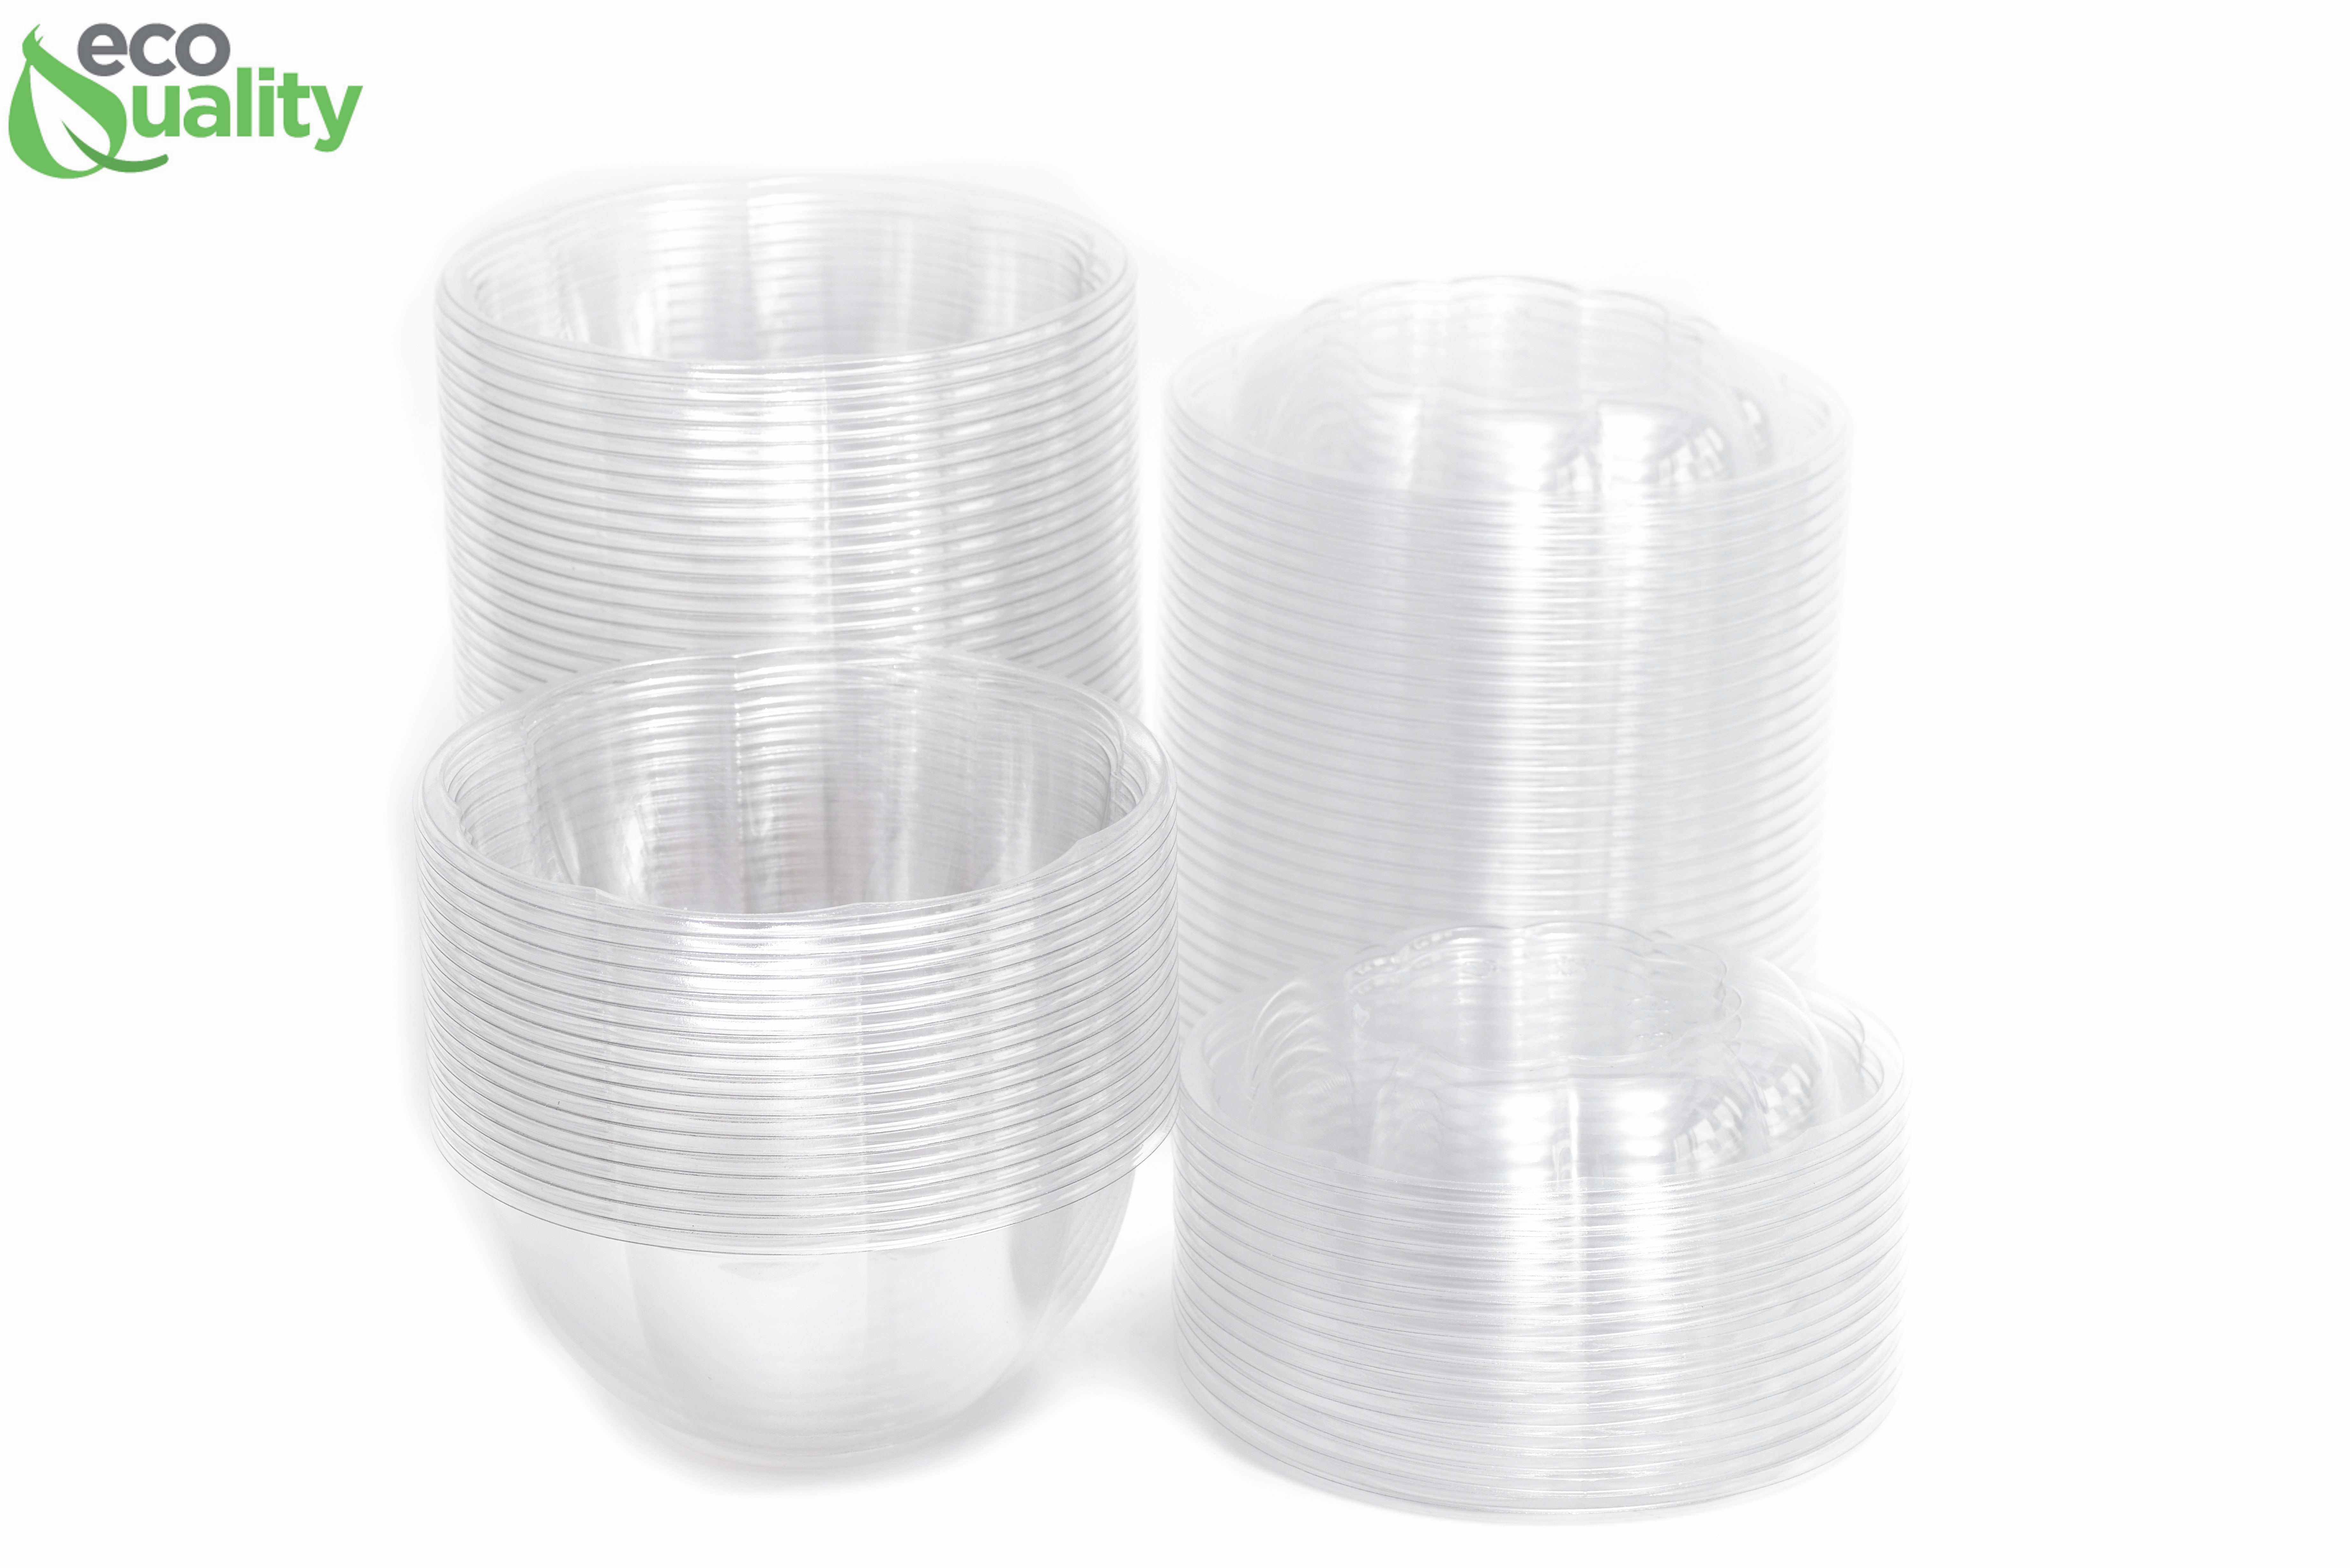 64oz Salad Bowls To-Go with Lids - Crystal Clear Plastic Disposable Wide  Salad Containers | Airtight, Lunch, Salads, Parfait, Fruits, Leak Proof